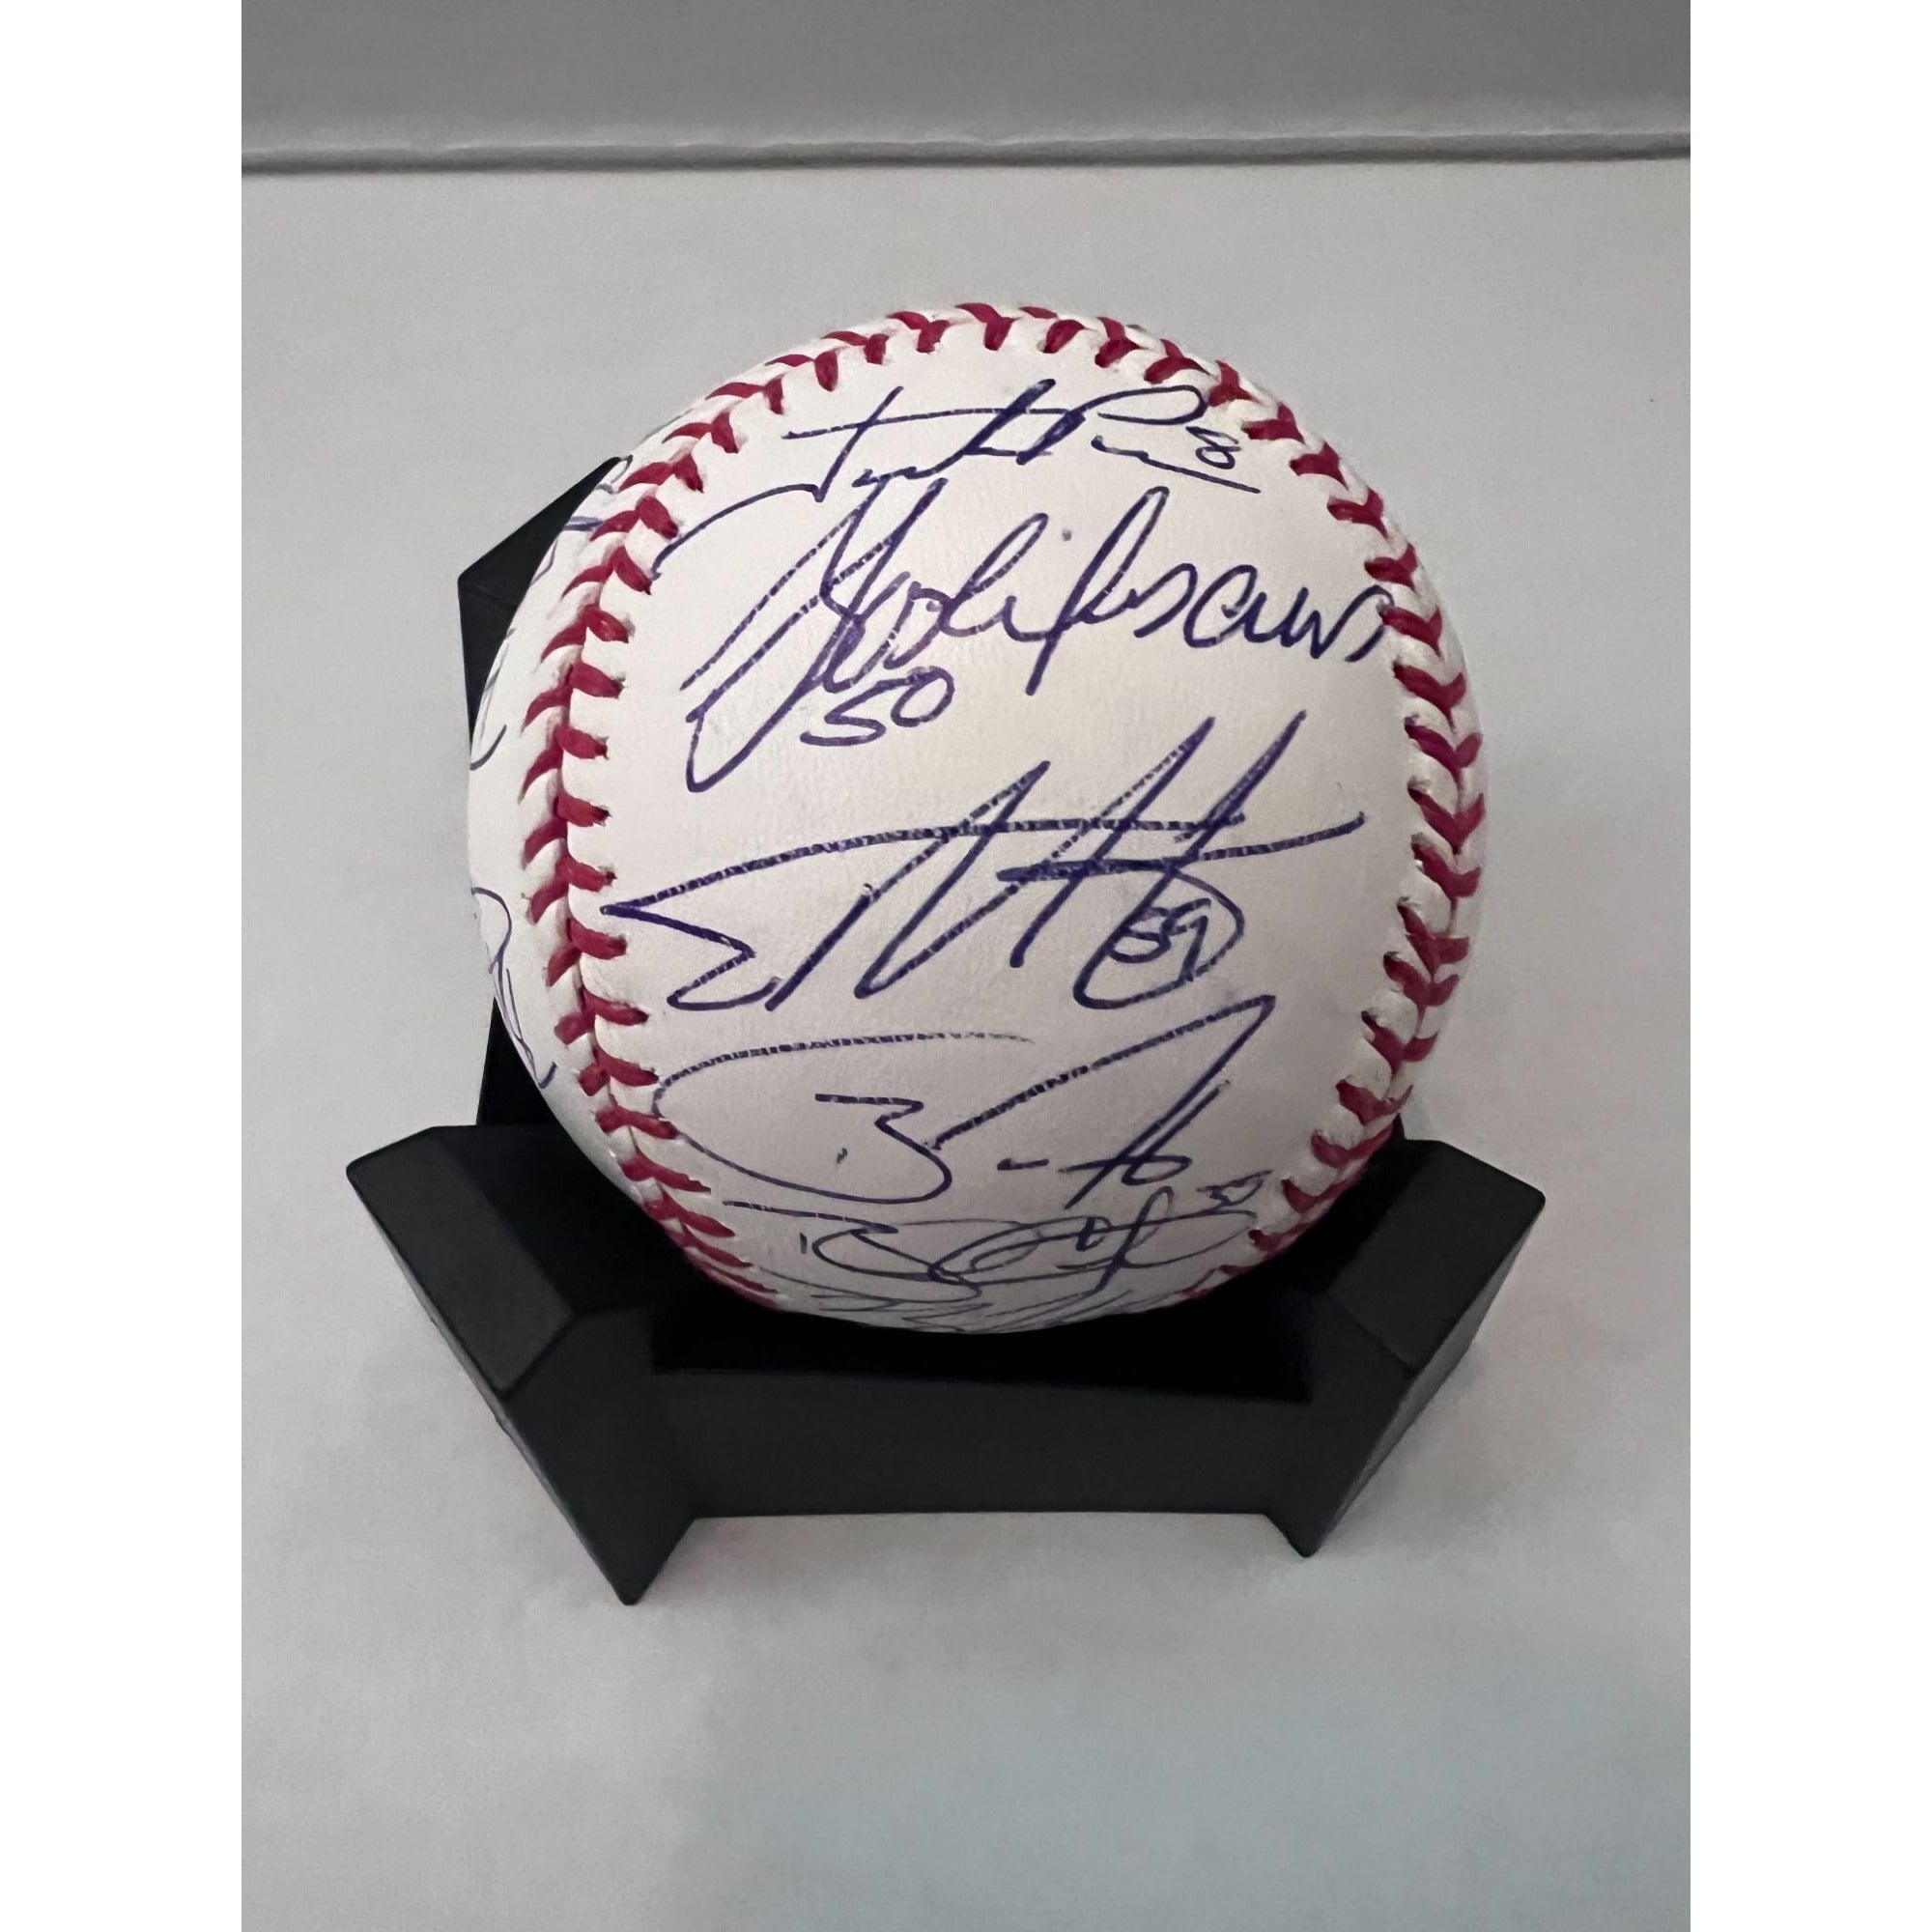 Buster Posey Madison Bumgarner Bruce Bochy 2012 San Francisco Giants World Champions team signed baseball with proof of